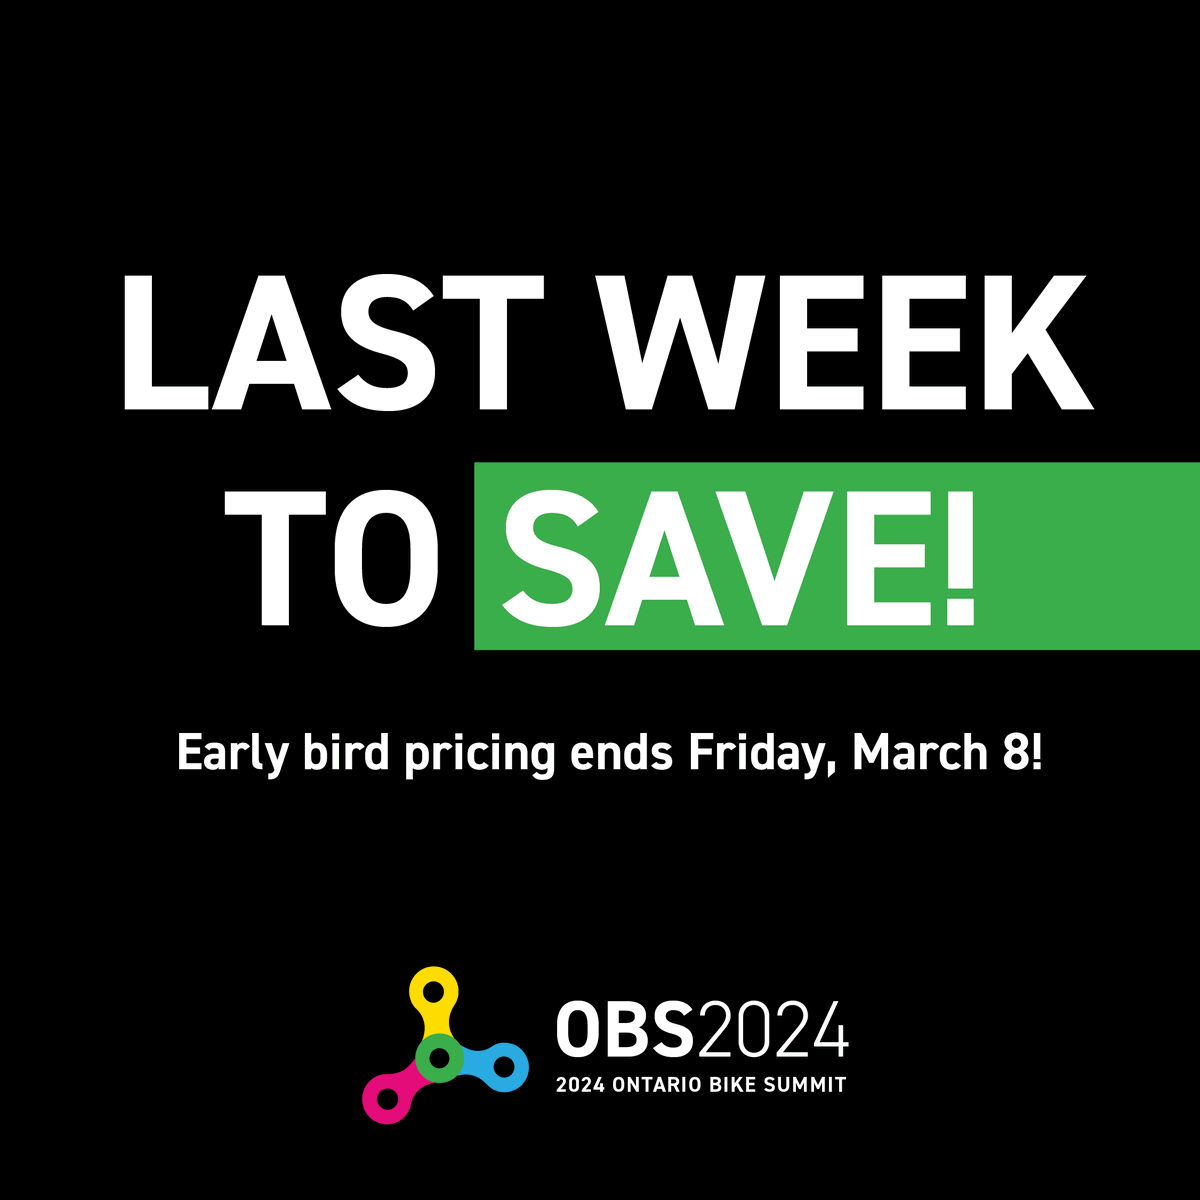 Register for #OBS2024 today to access early bird pricing (saves you $220!) and get first access to workshops where space is limited. Agenda will be released next week! @MLTPlanner @EMcMahon_TCT @CyclePlanner @DianeLFreeman site.pheedloop.com/event/OBS2024/…